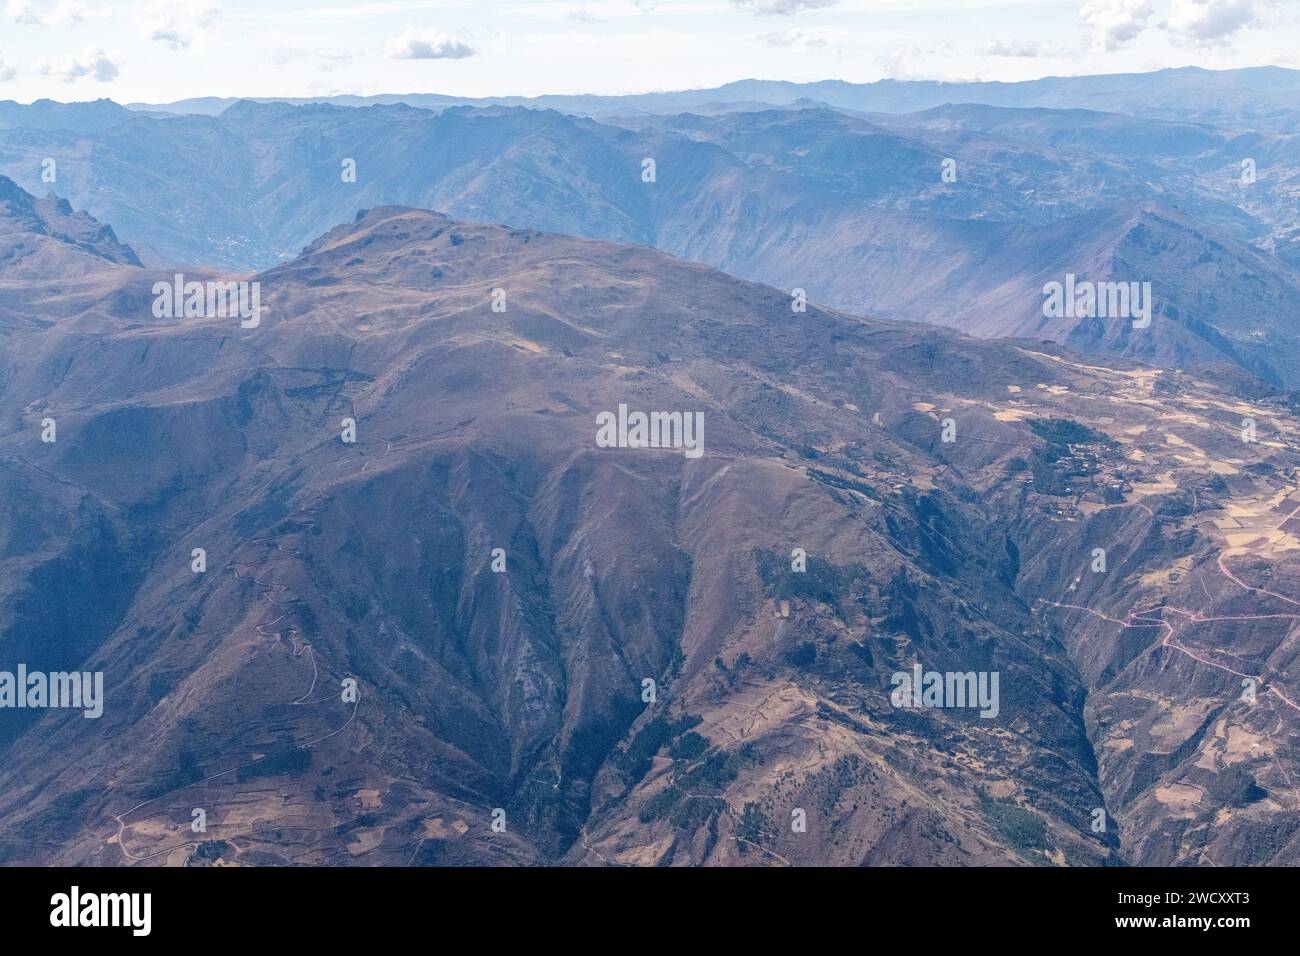 A view from a plane of the Sacred Valley near Cusco in the Andes mountains in Peru Stock Photo